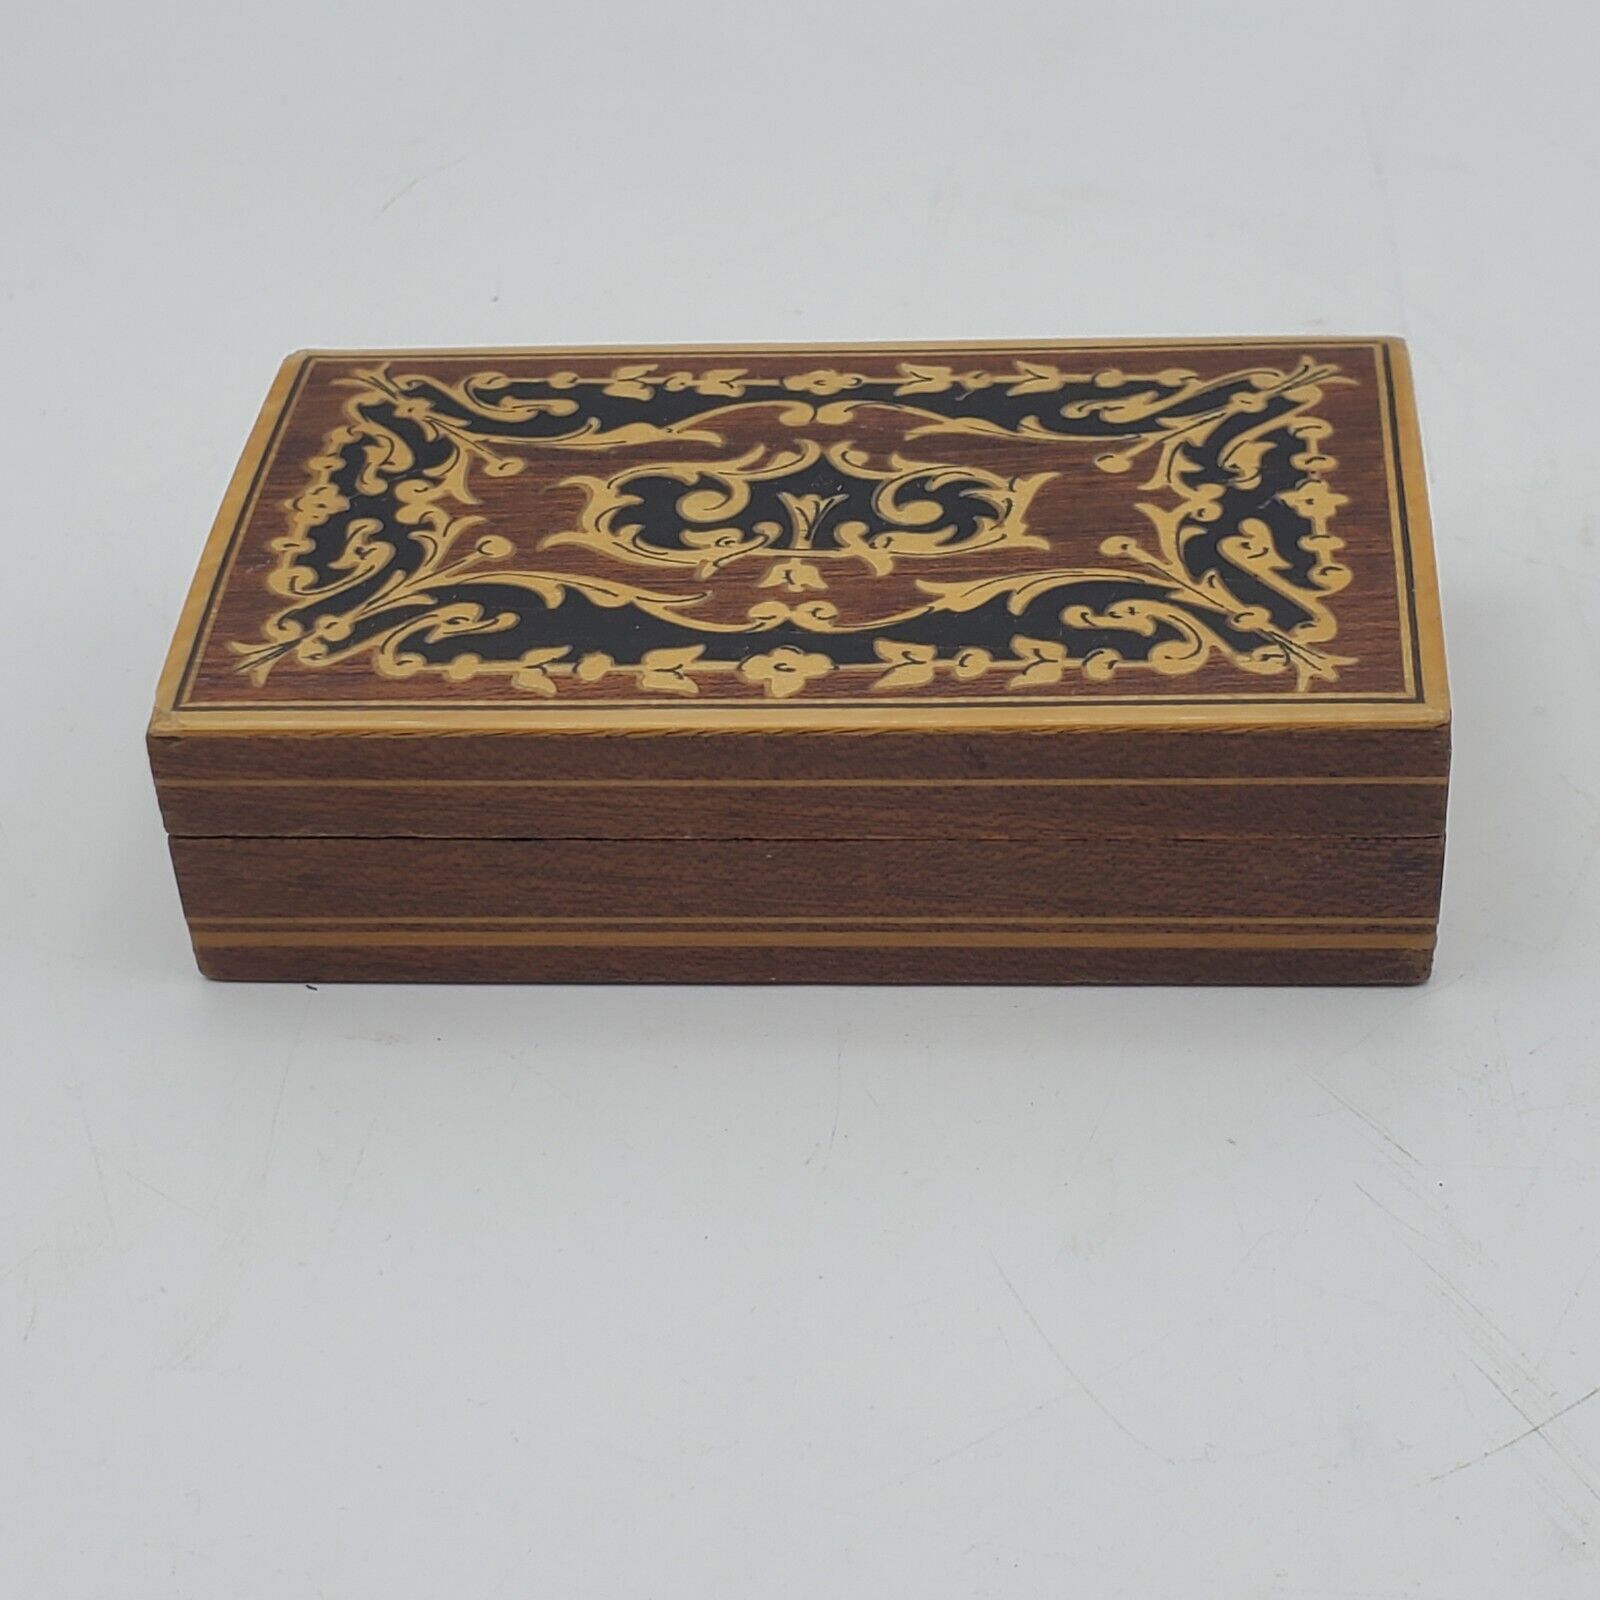 Vintage Italian Lacquered Inlaid Wooden Trinket Jewelry Box